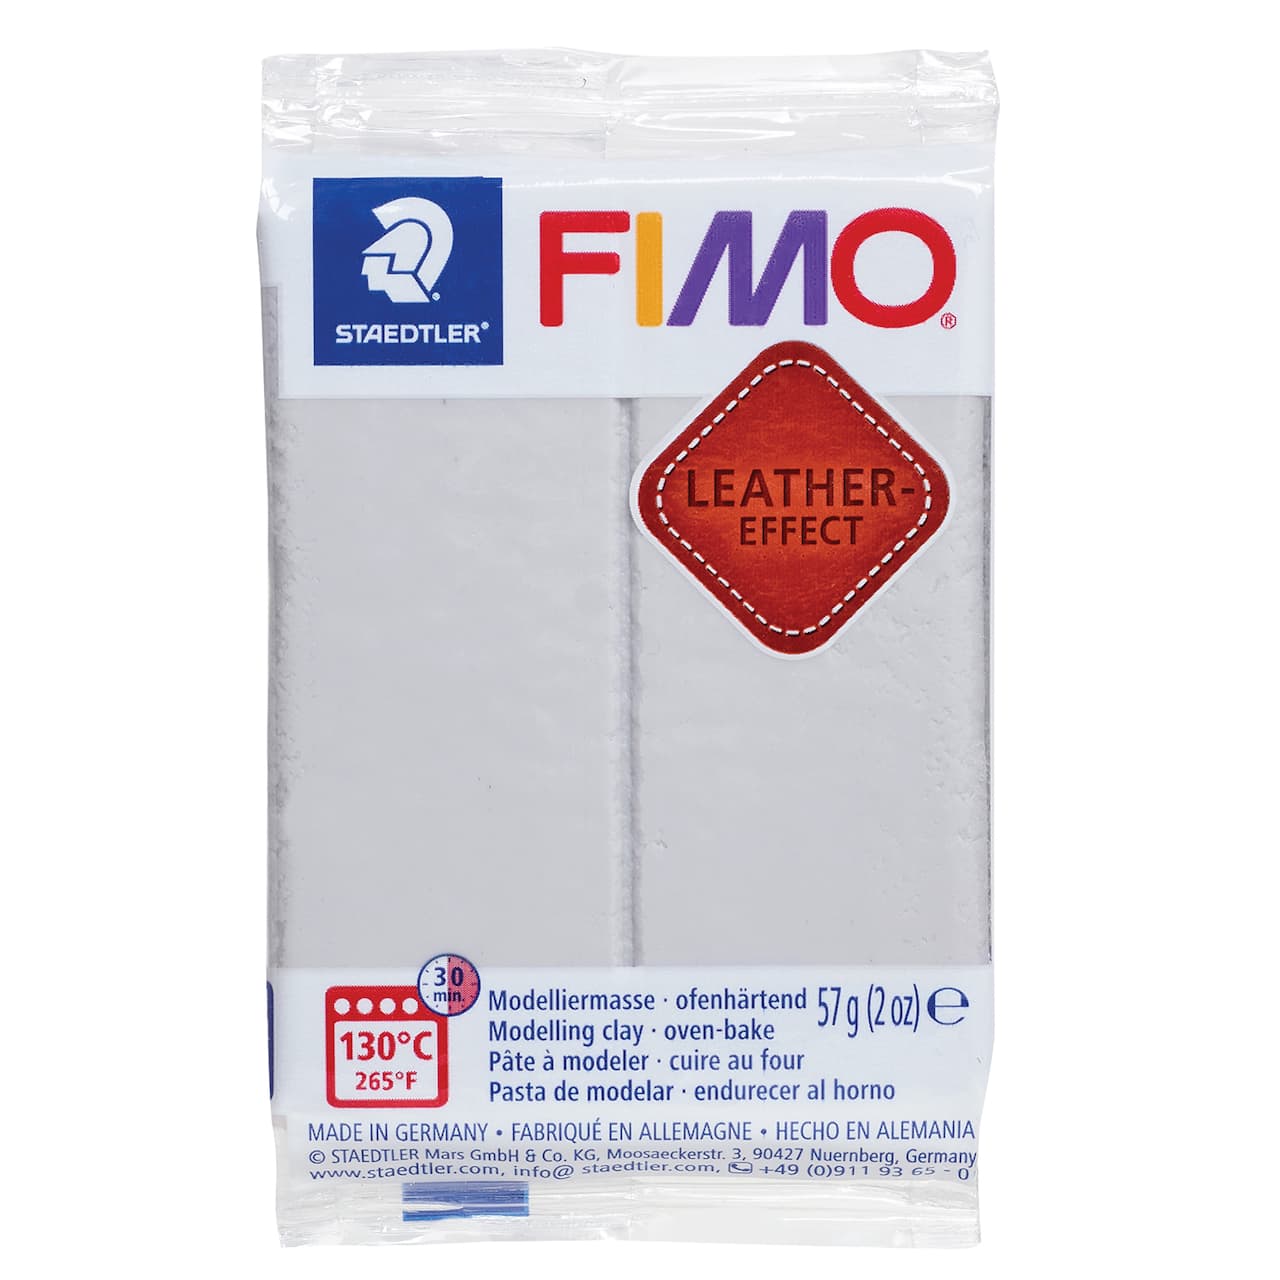 Staedtler&#xAE; FIMO&#xAE; Leather-Effect Oven-Bake Modelling Clay